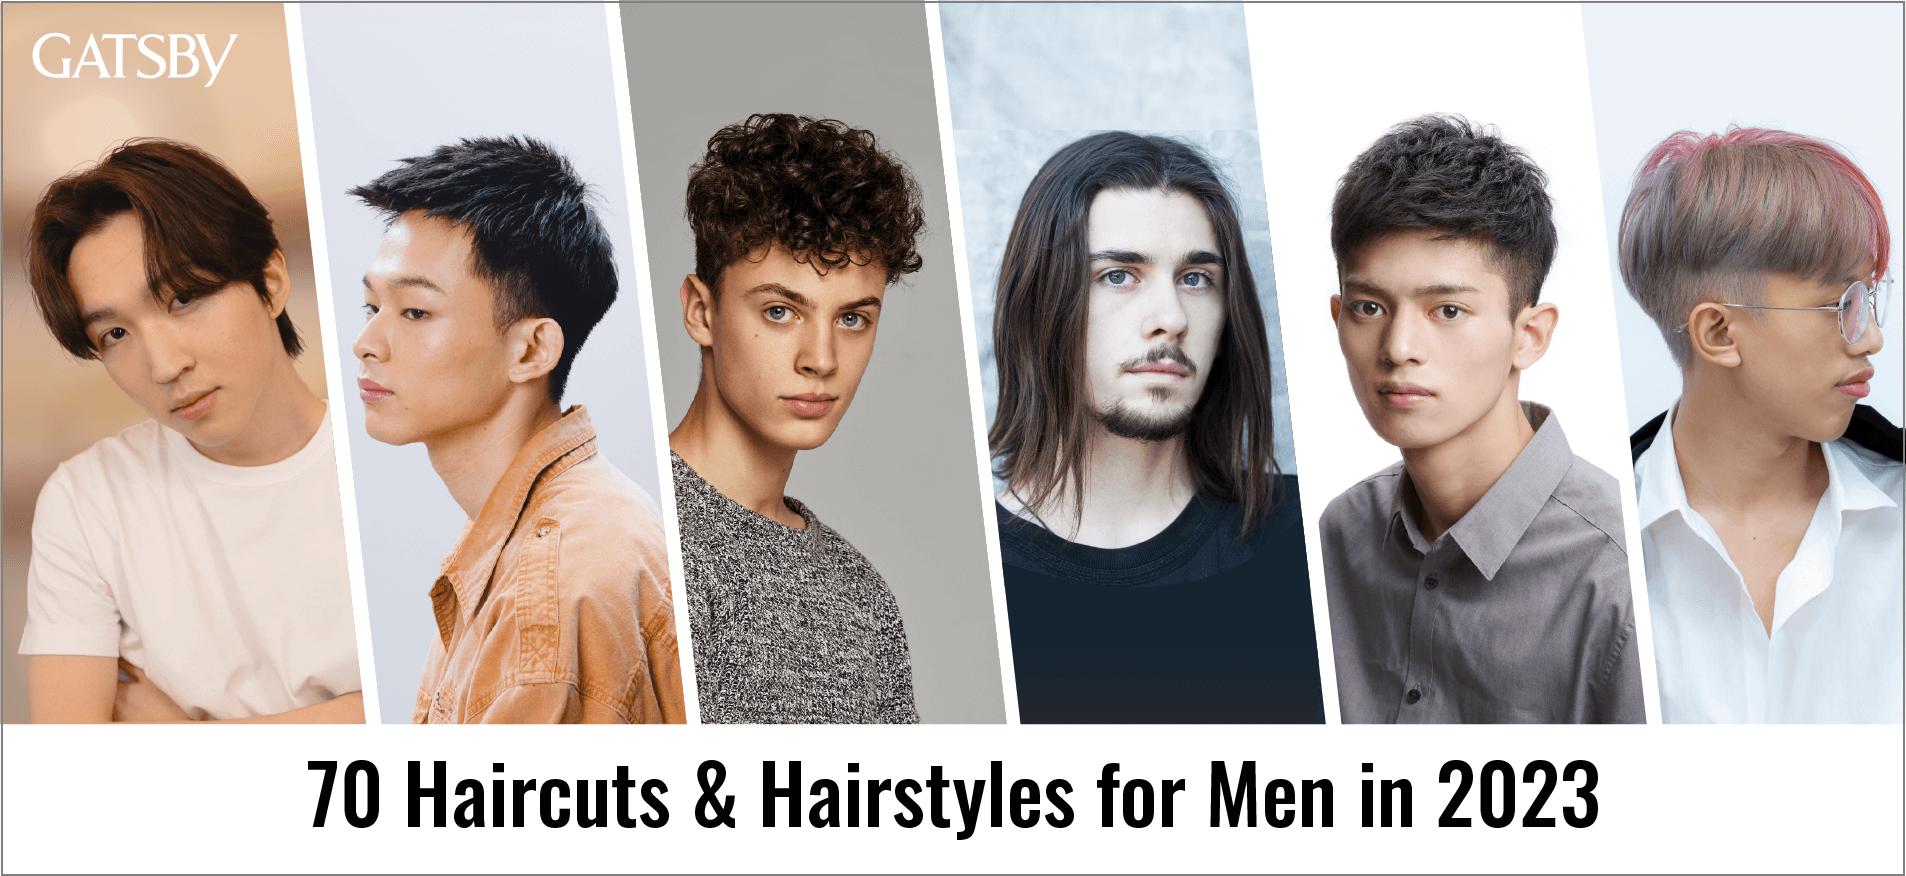 Trends in haircuts for 2023 according to Korean fashion